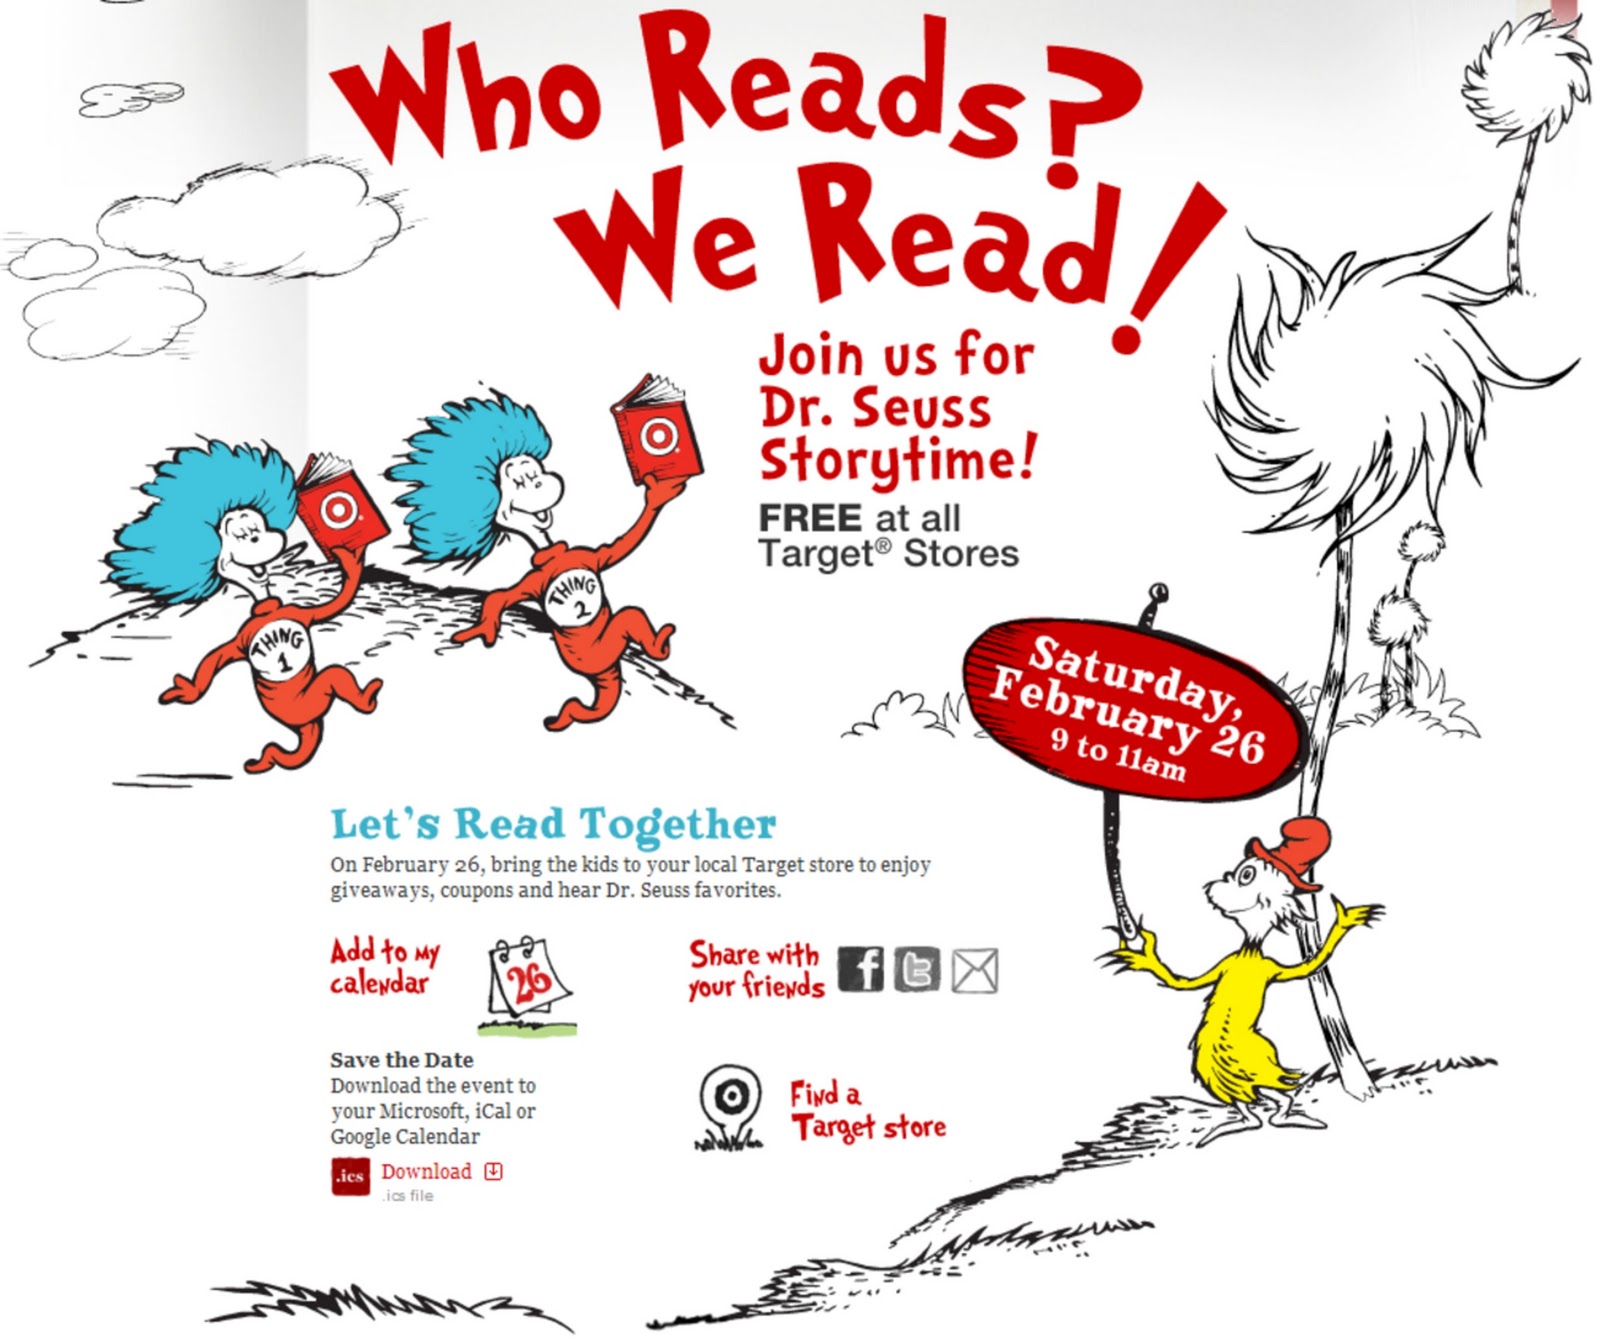 free-is-my-life-free-read-across-america-event-at-your-local-target-store-2-26-9-11am